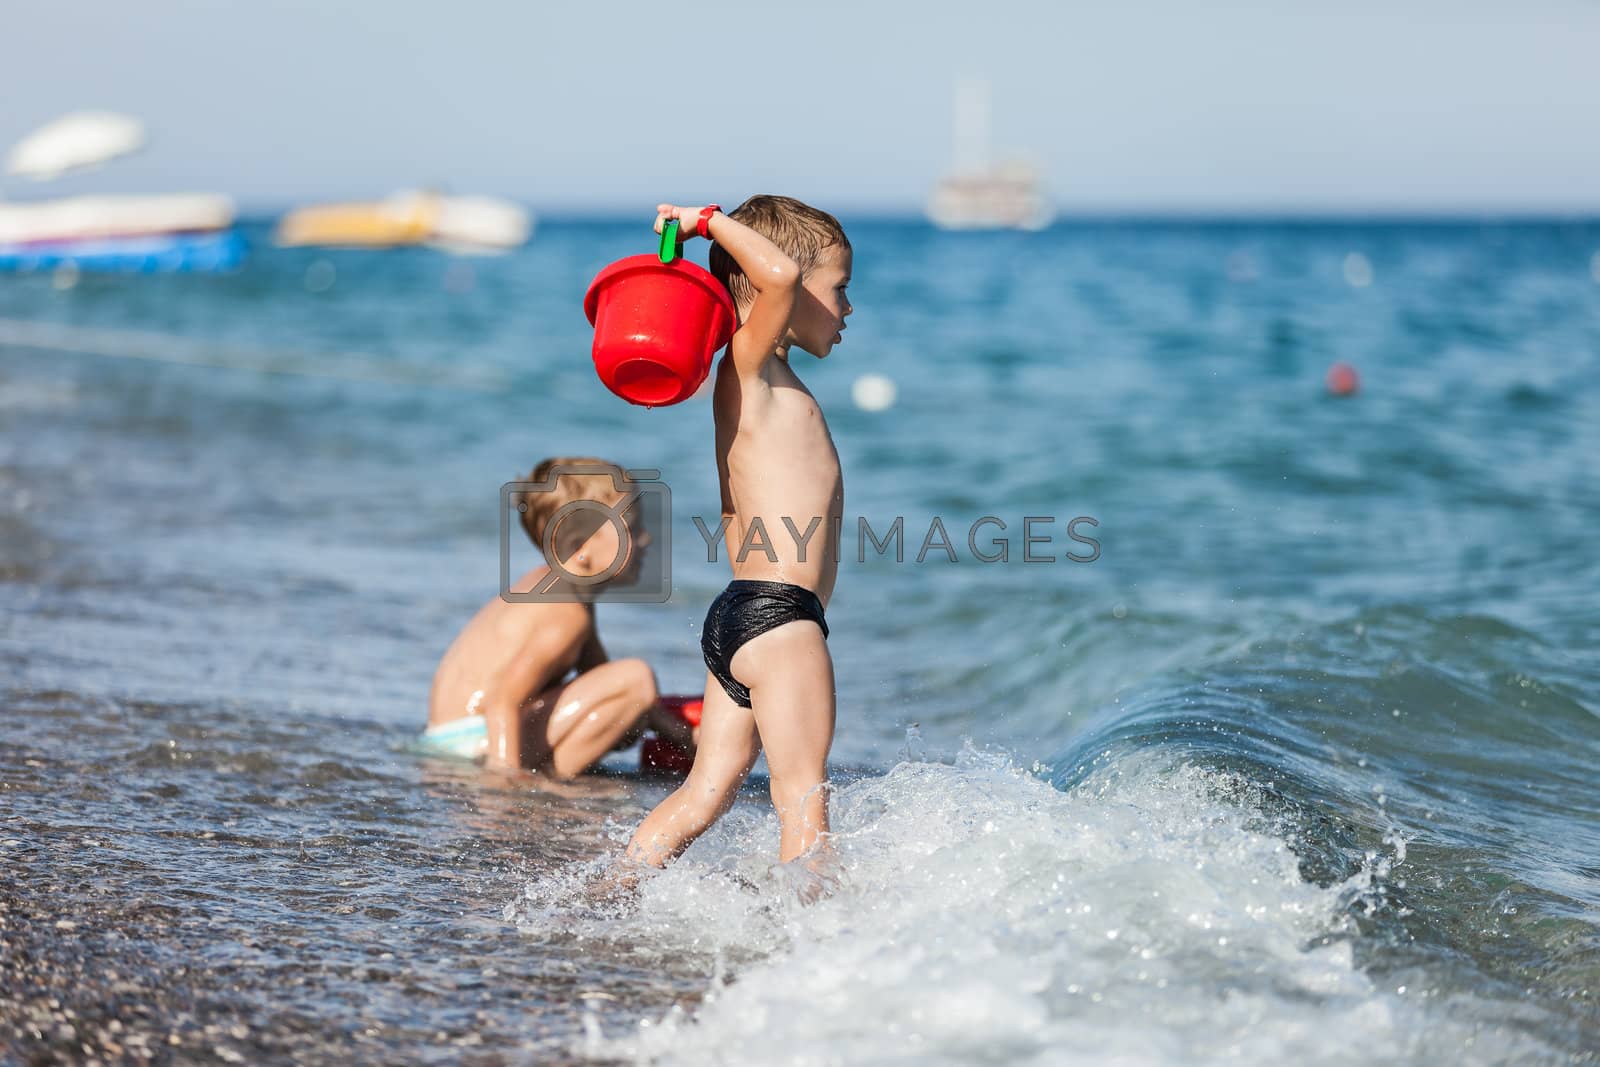 Royalty free image of Children on sea beach by ia_64